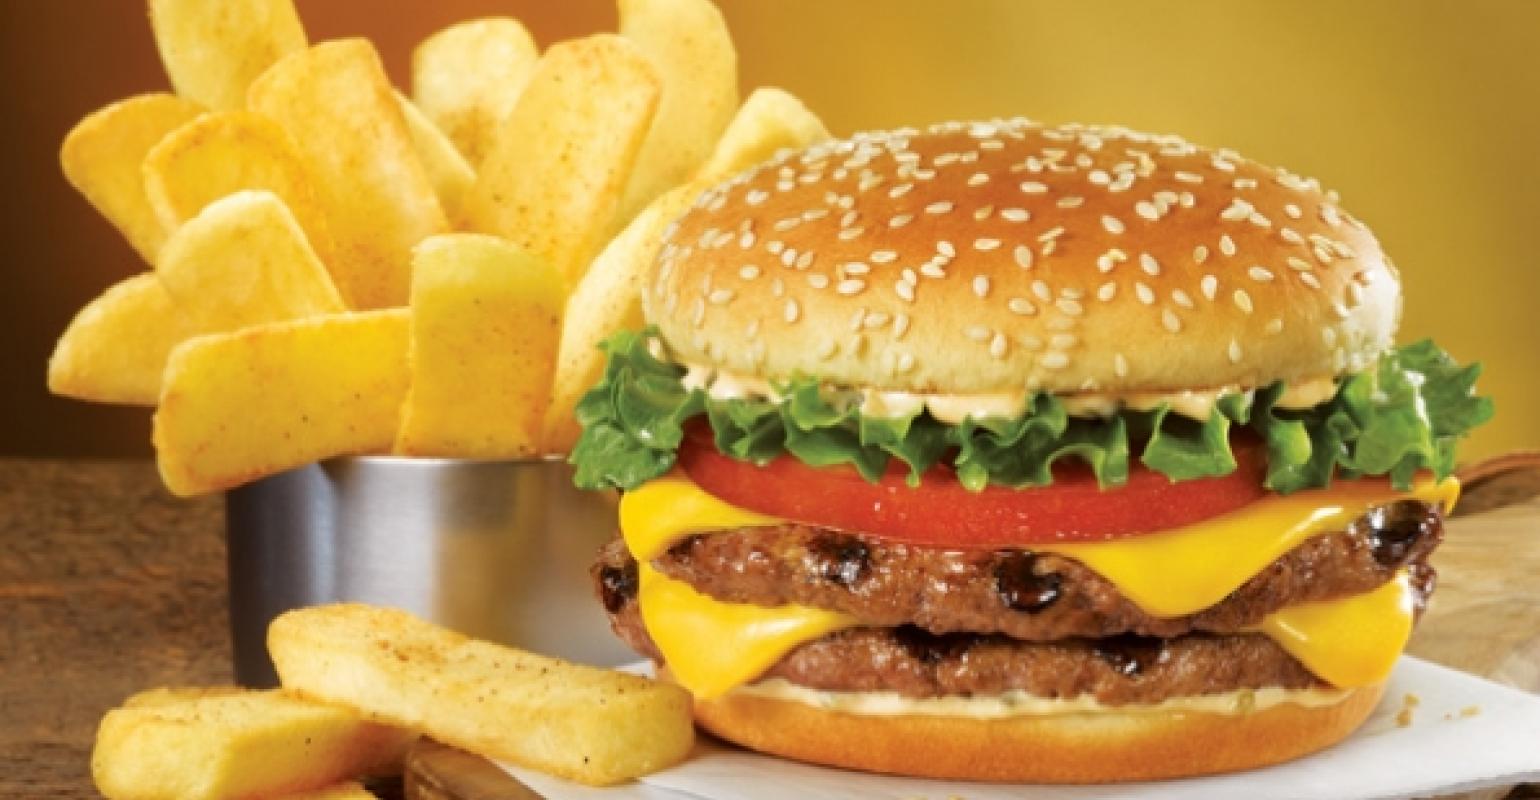 McDonald's, Red Robin, Denny's, others take collaborative approach